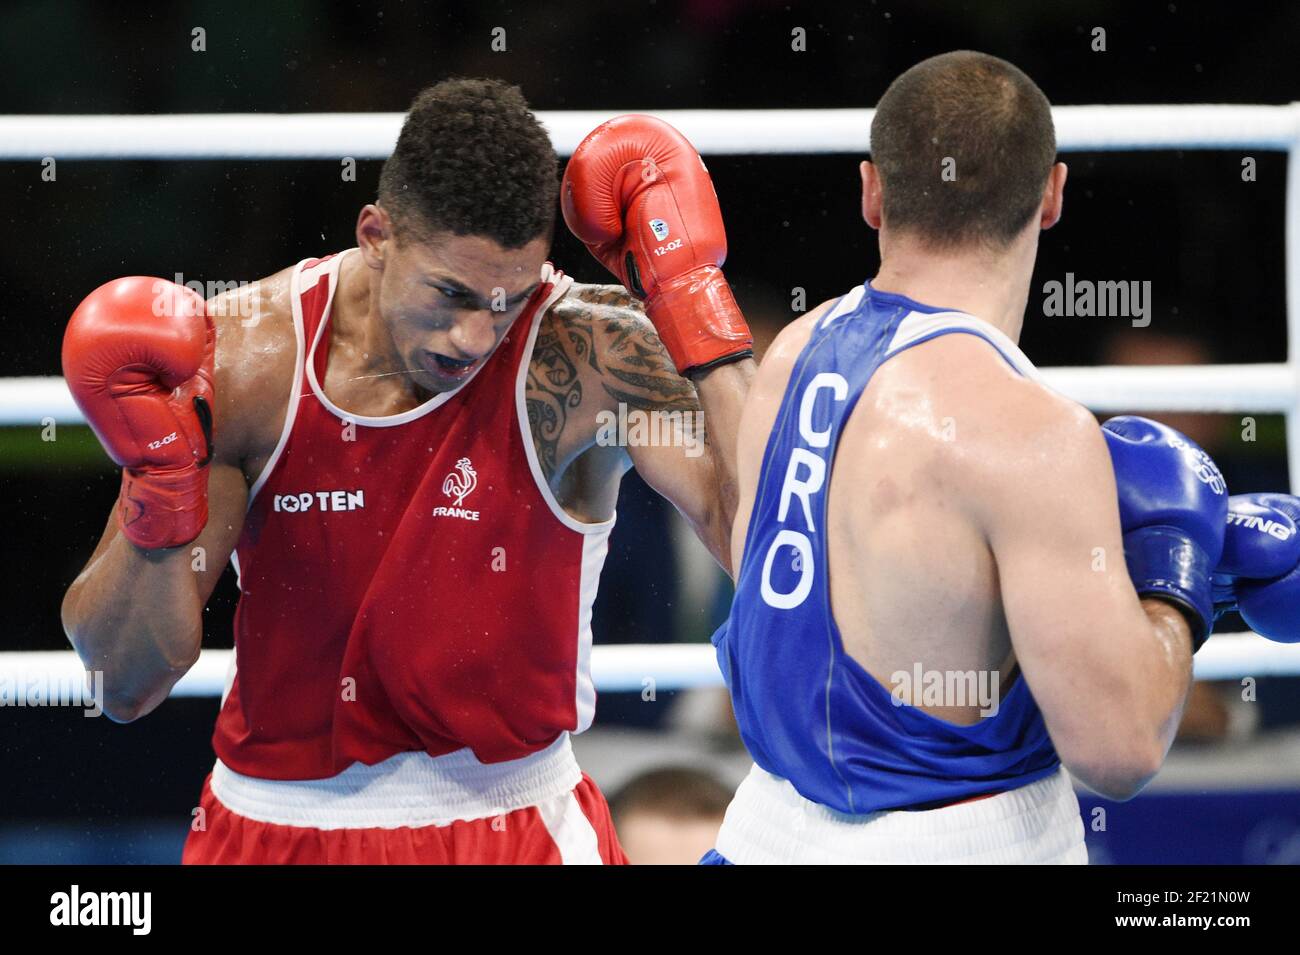 Page 2 - Boxing category Stock Photos & Images from Alamy